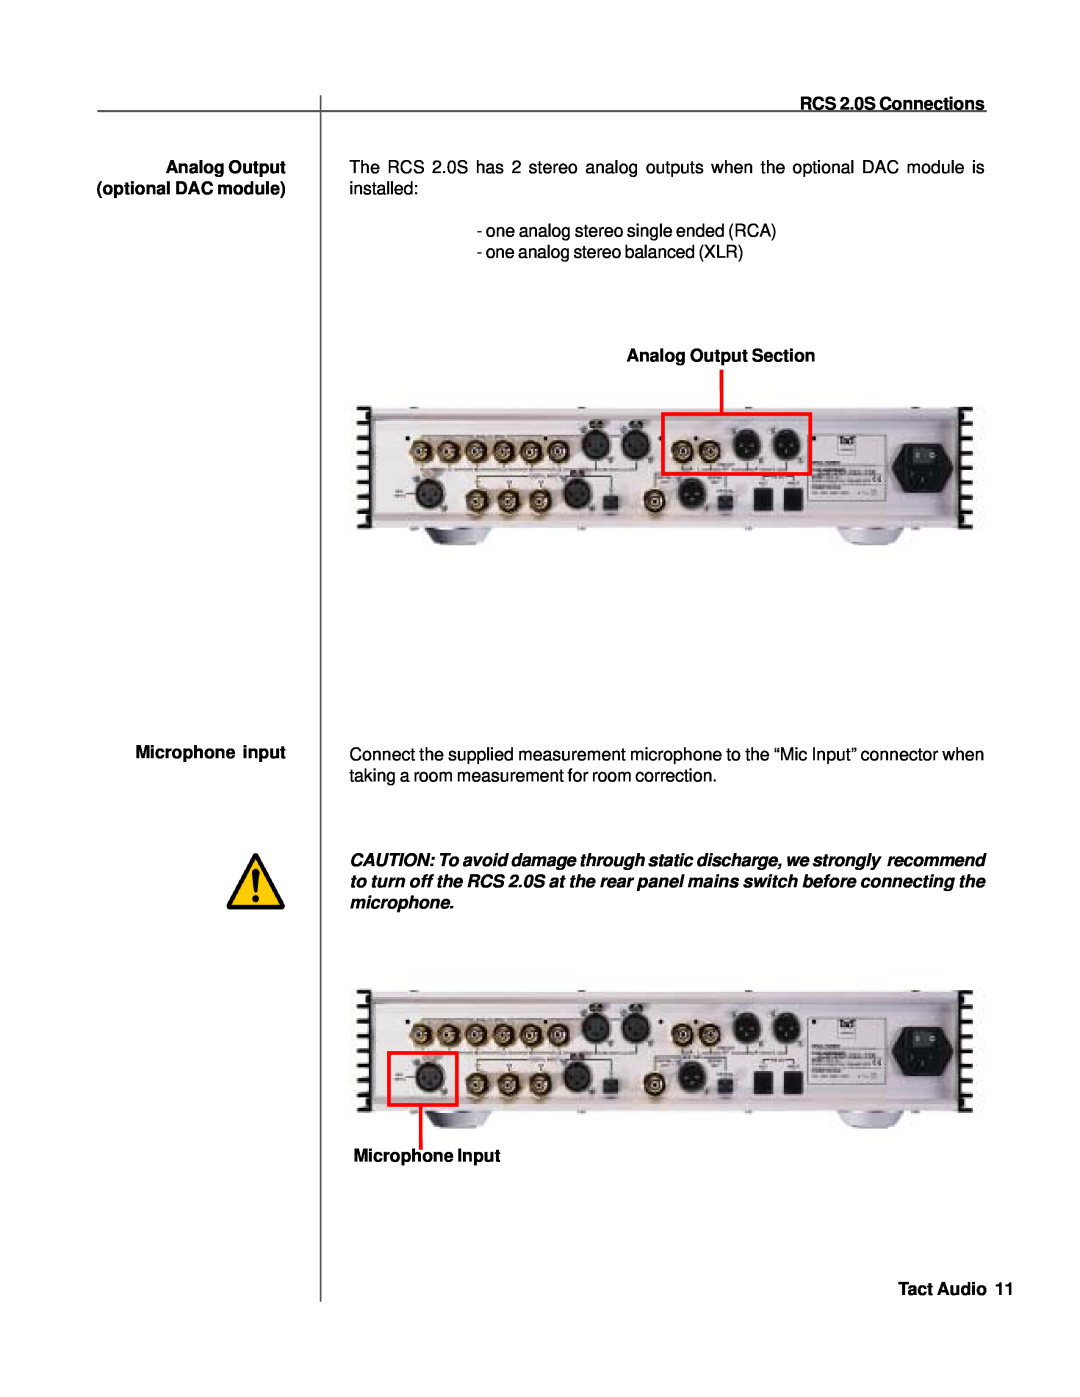 TacT Audio owner manual RCS 2.0S Connections, optional DAC module, Analog Output Section, Microphone input 